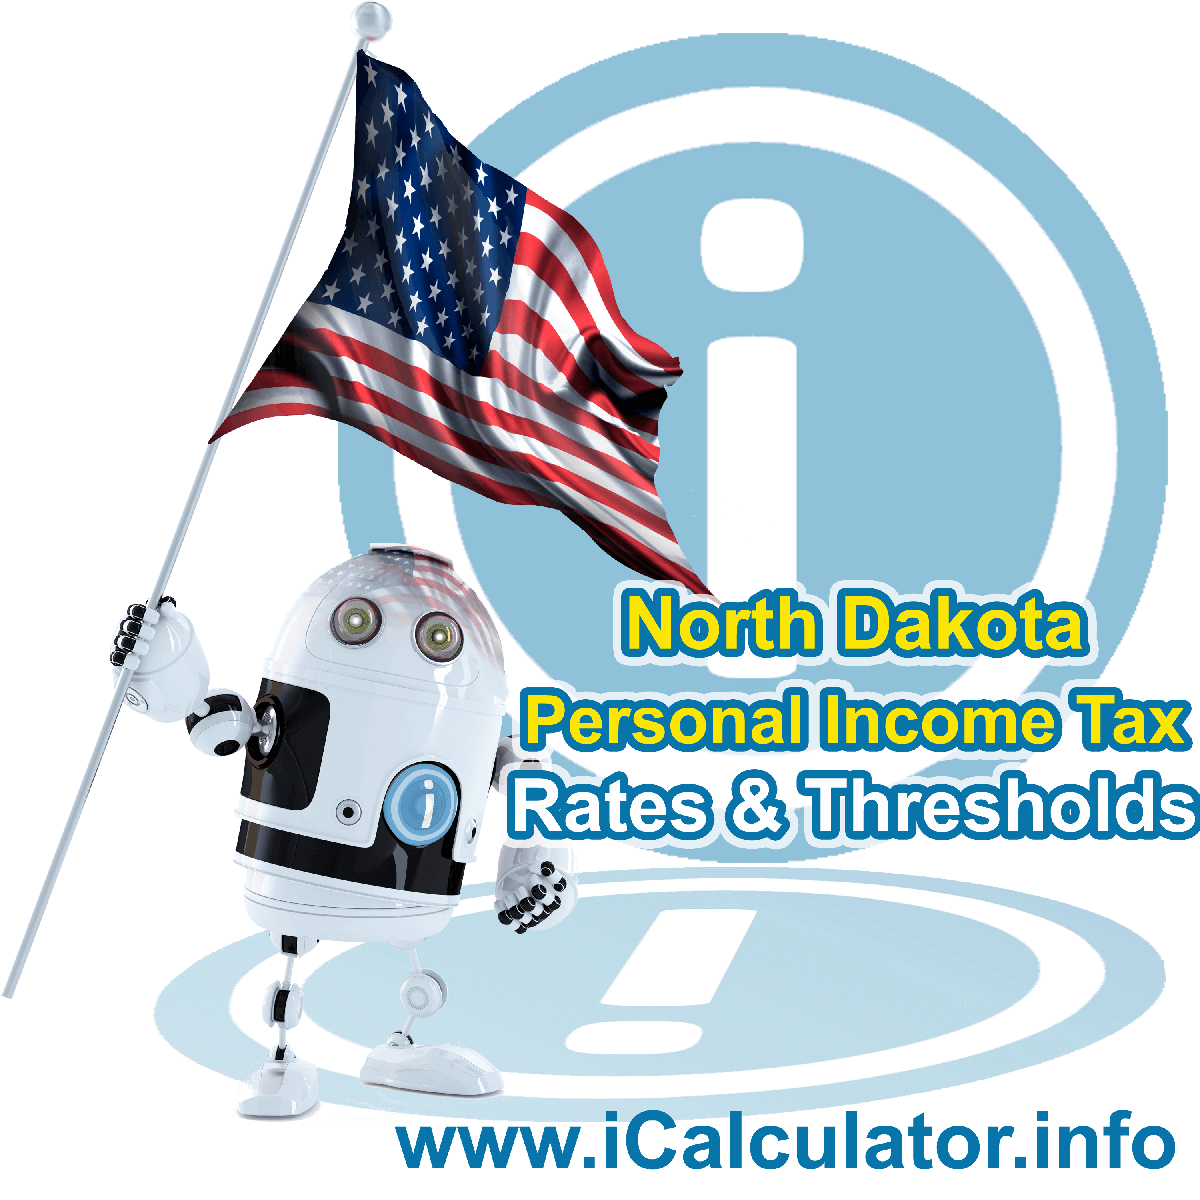 North Dakota State Tax Tables 2020. This image displays details of the North Dakota State Tax Tables for the 2020 tax return year which is provided in support of the 2020 US Tax Calculator